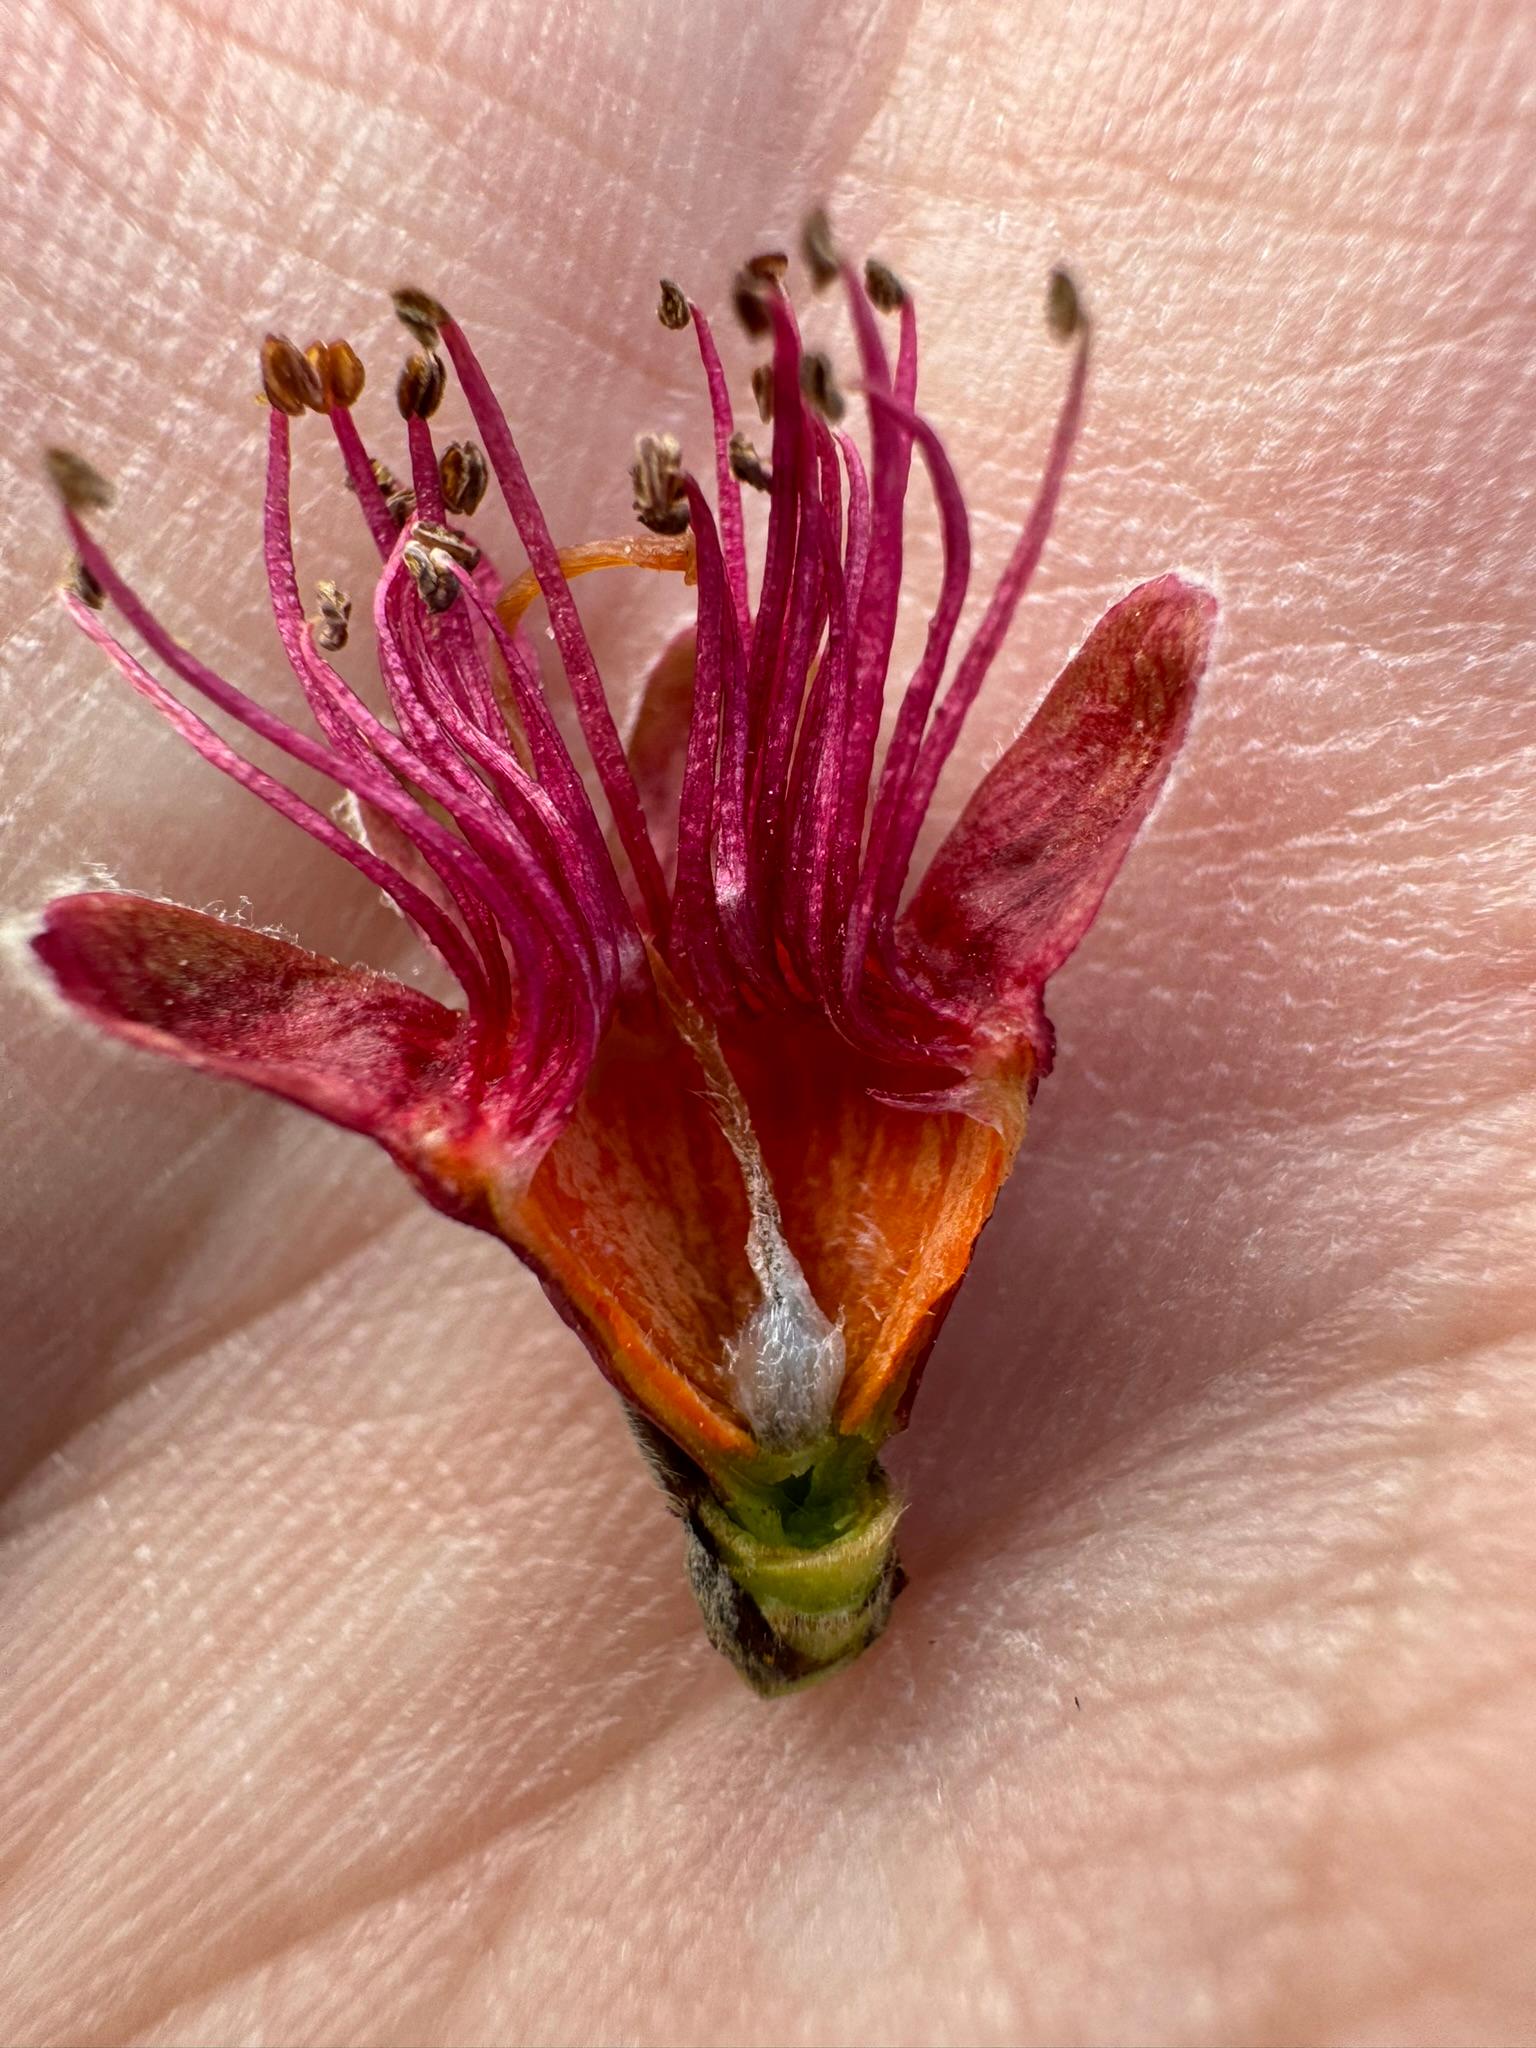 Peach flower with frost damage.